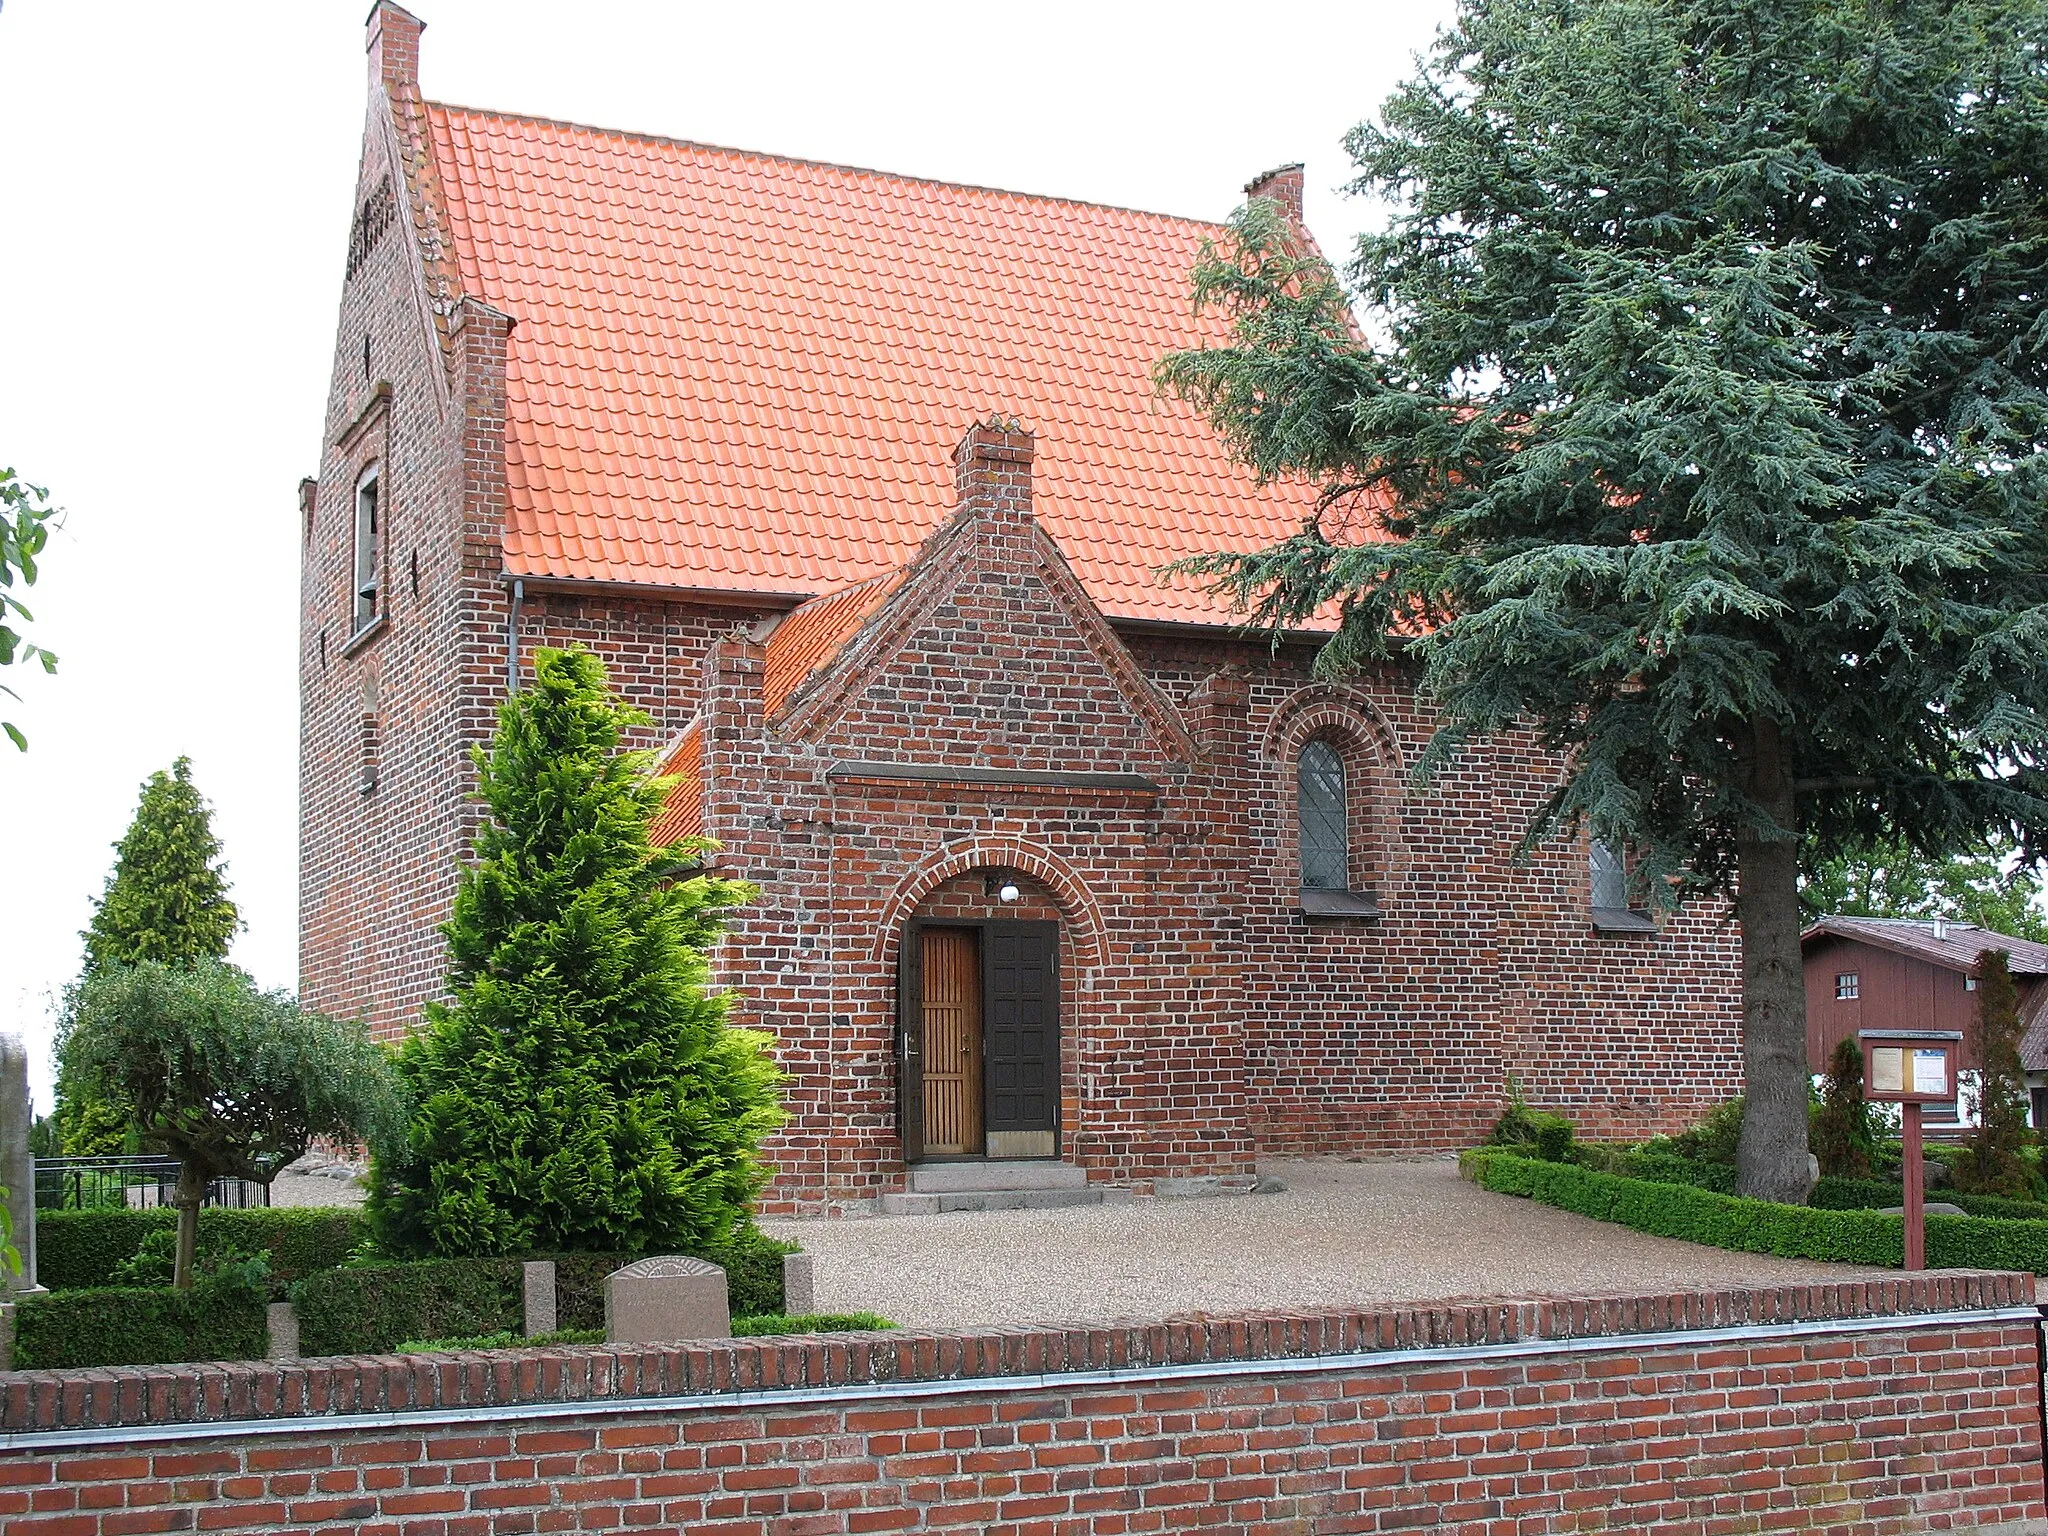 Photo showing: The church "Krønge Kirke" south of the town "Maribo". It is located on the island Lolland in east Denmark.